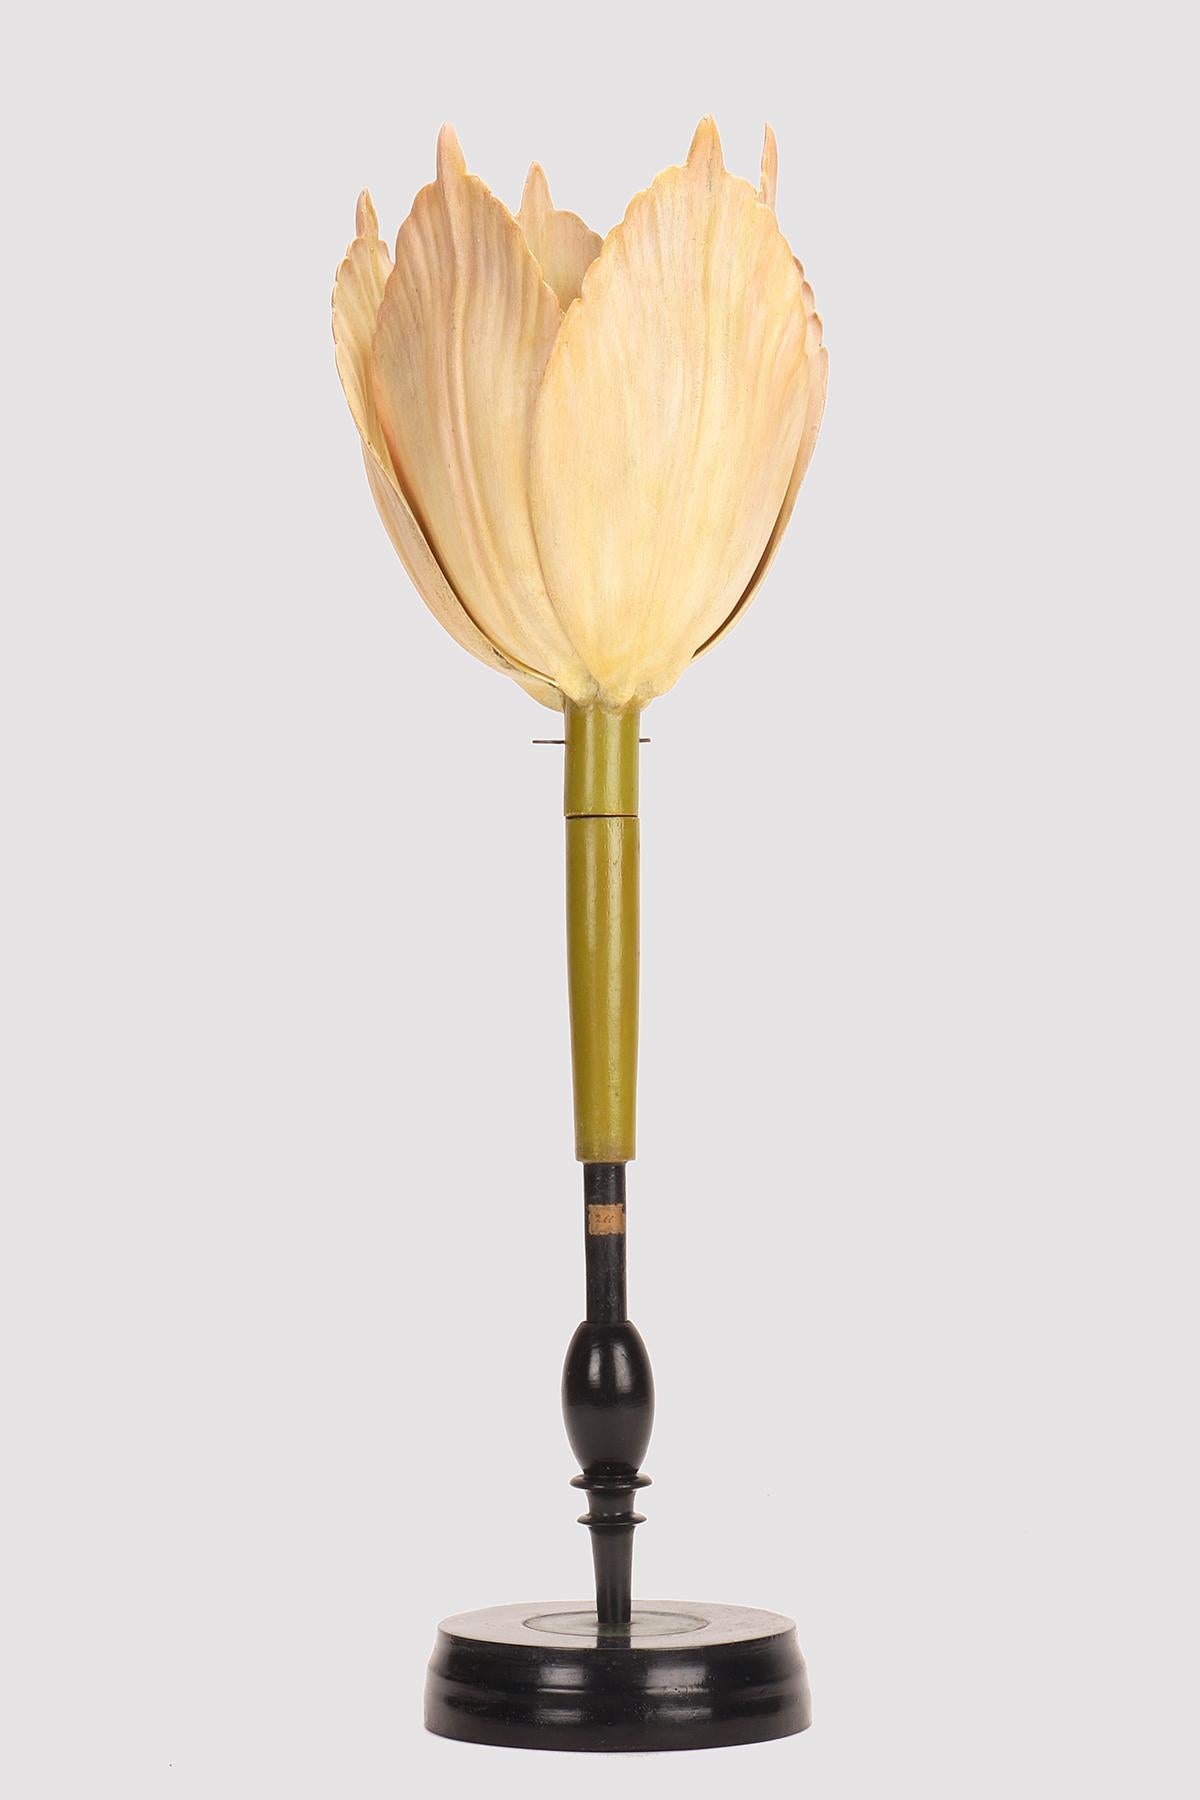 A rare Brendel botanical model of Tulipa gesneriana, the Tulip N.200 (Liliaceae), light pink color. The wooden ebonized round base holds the model which opens revealing the flower. The model can be disassembled to show the individual components of